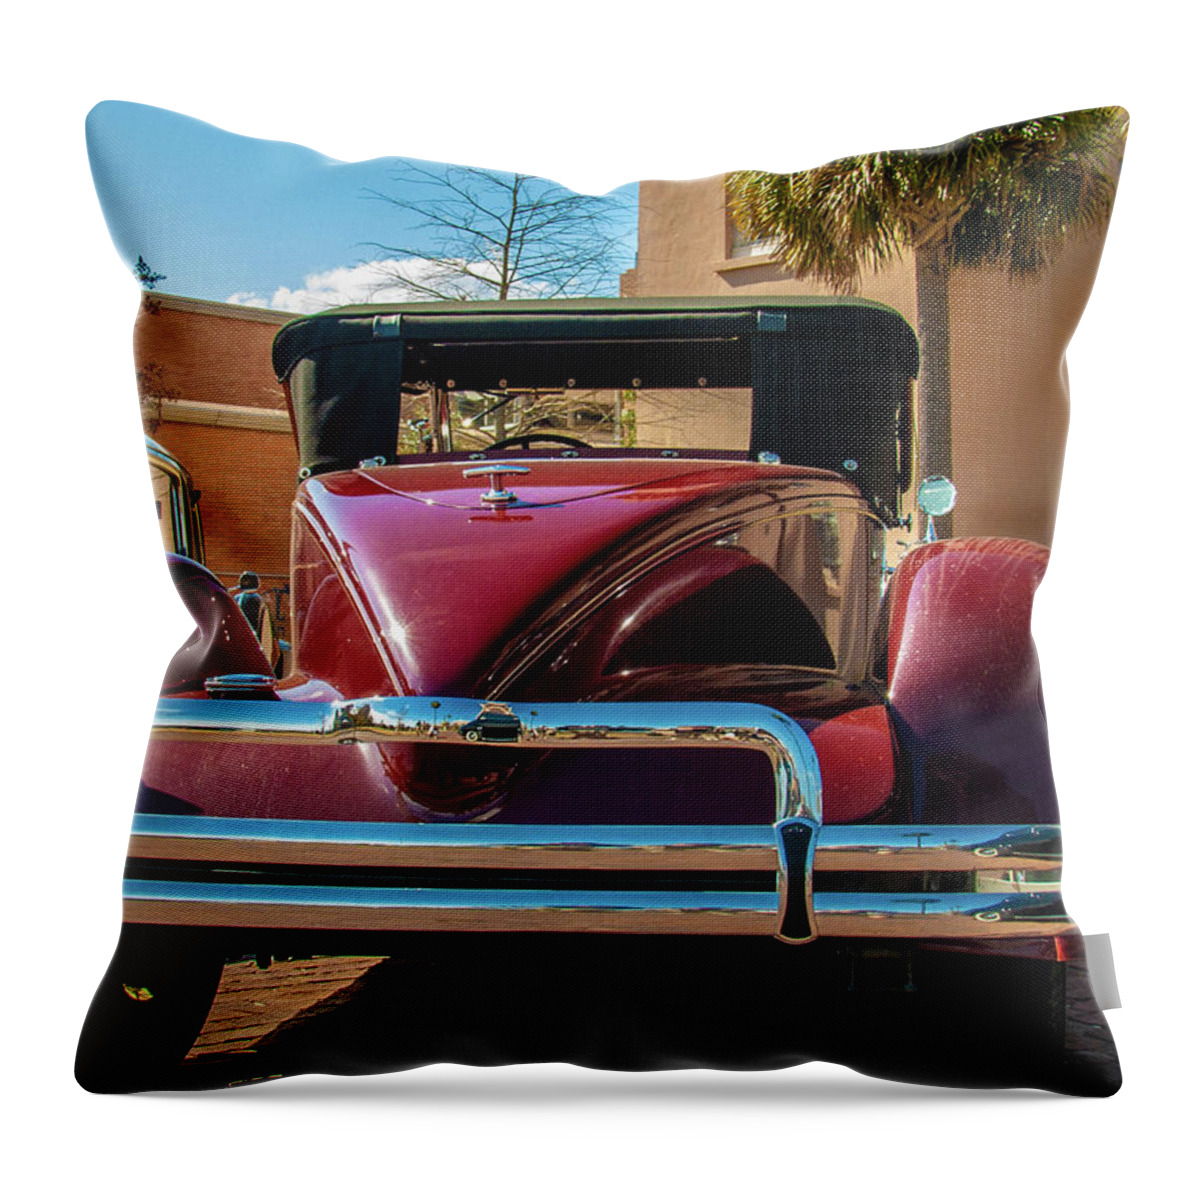 Automobile Throw Pillow featuring the photograph Boat Tail Antique Automobile by Louis Dallara